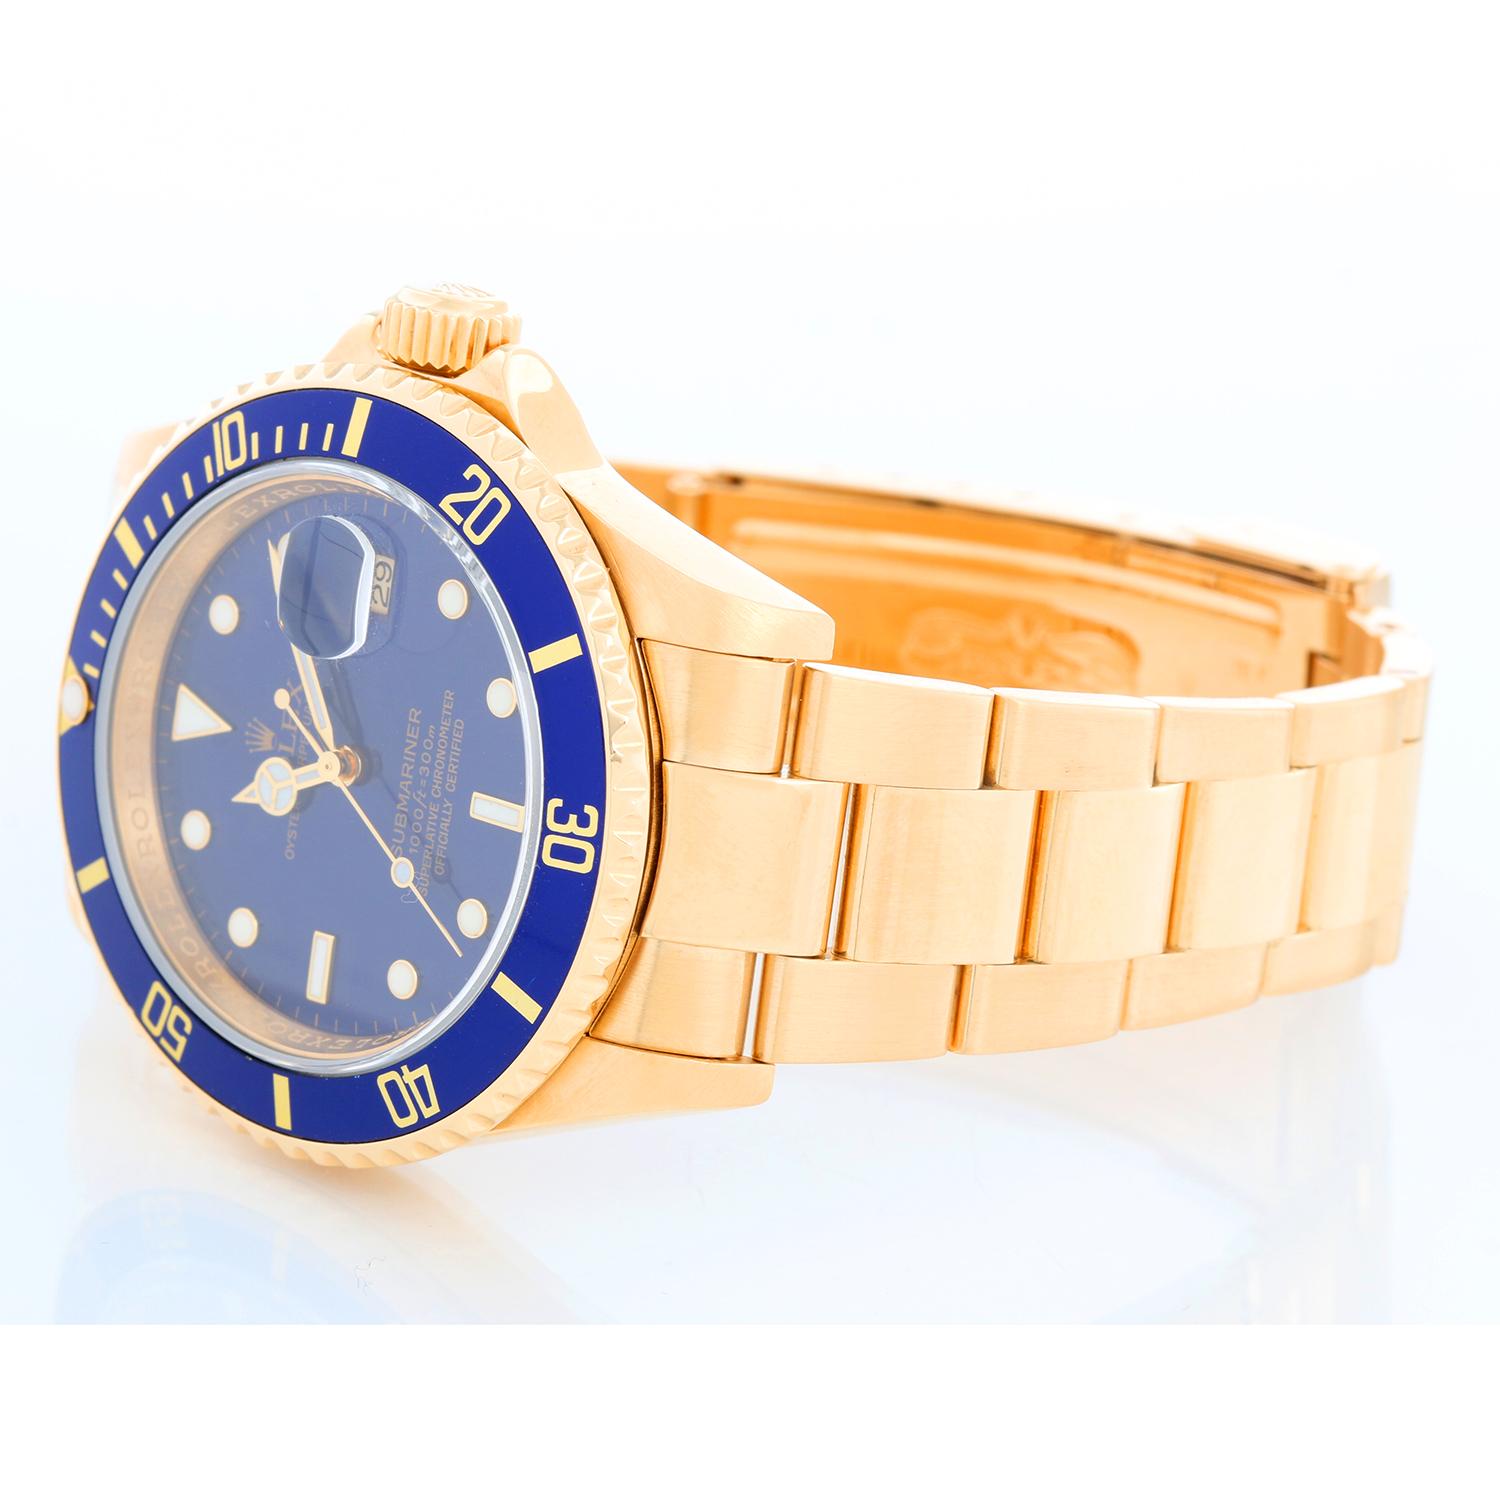 Rolex Submariner 18k Gold Men's Watch 16618 Blue Dial - Automatic winding, 31 jewels, Quickset, sapphire crystal. 18k yellow gold case with rotating bezel with blue insert (40mm diameter). Blue dial. Yellow gold Oyster bracelet . Pre-owned with